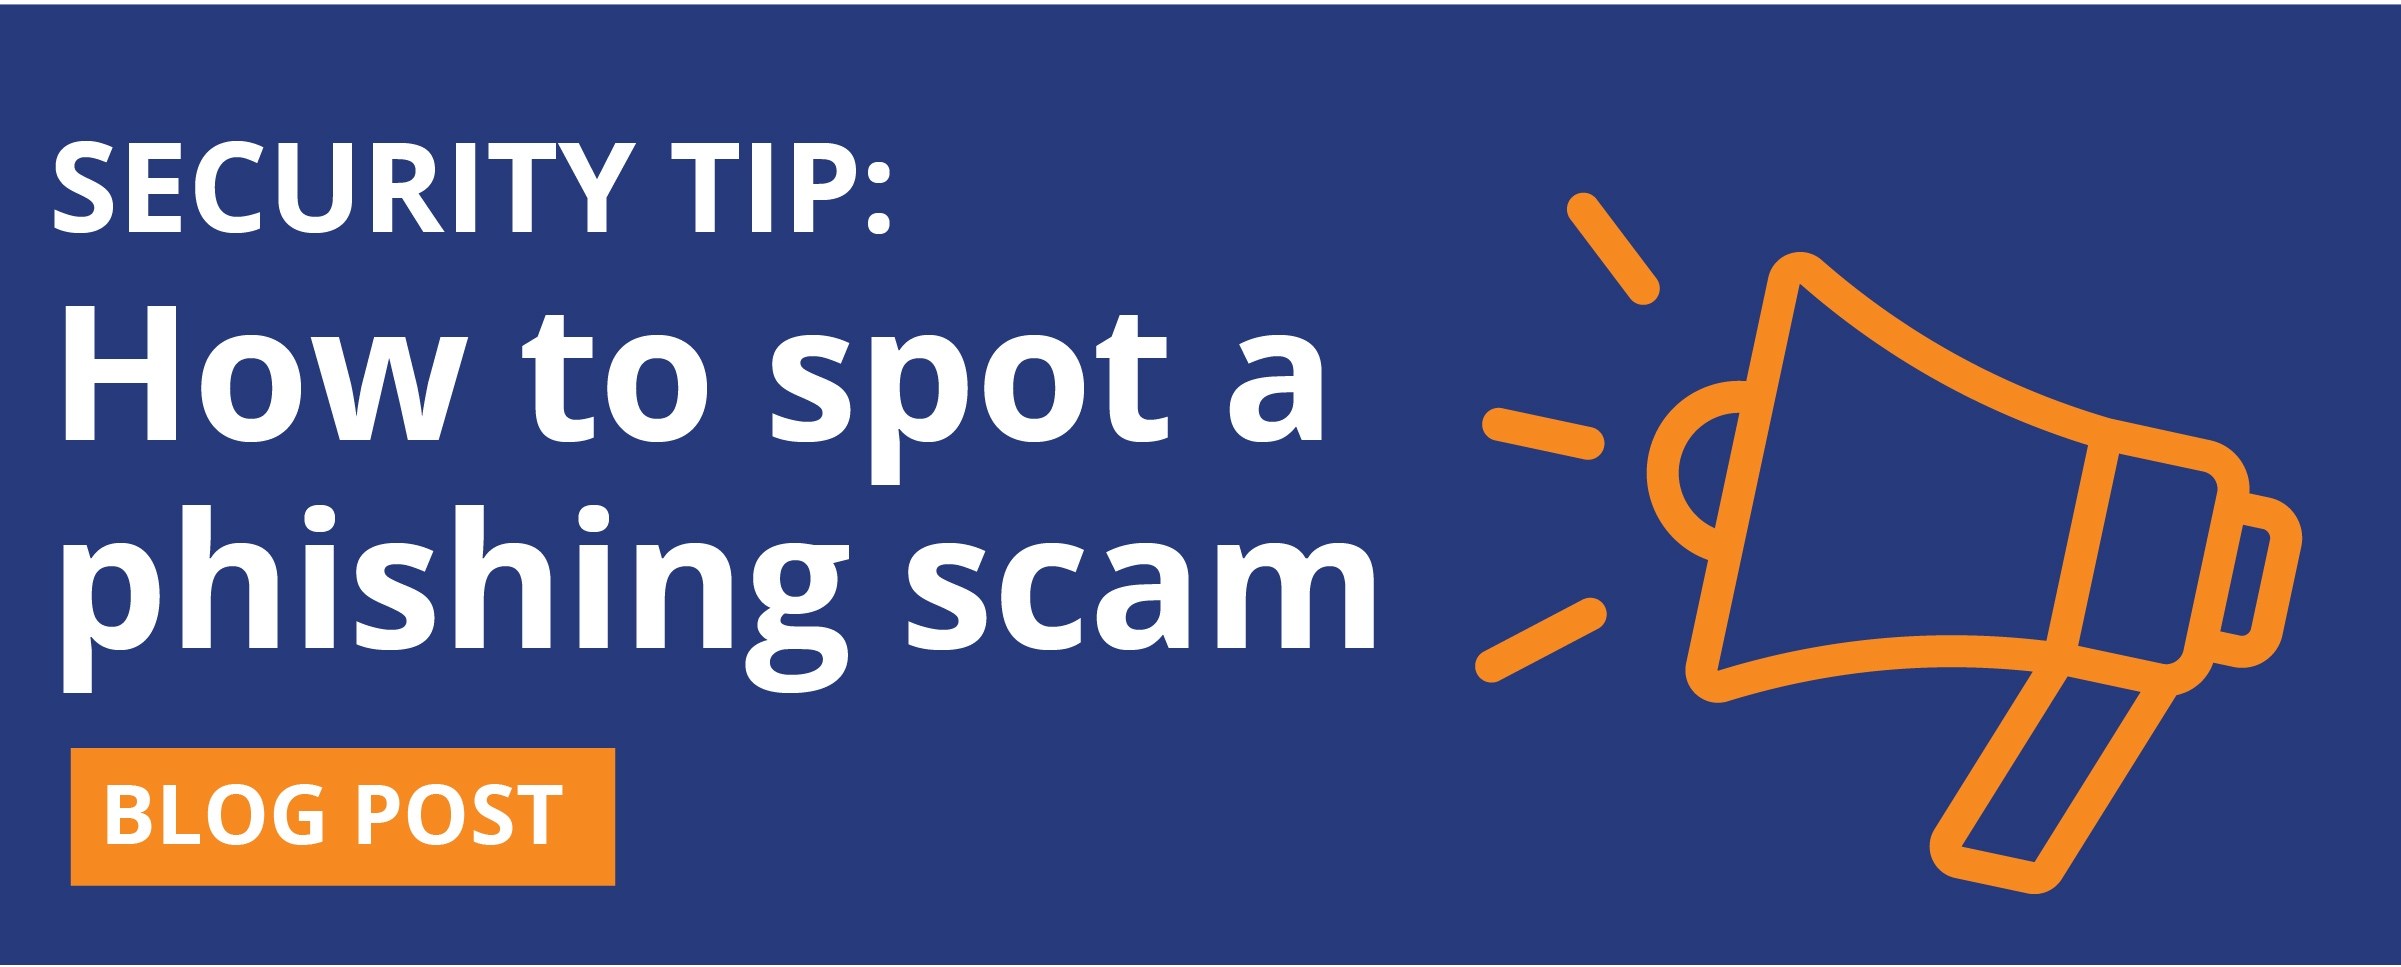 Blog with tips on how to spot a phishing scam